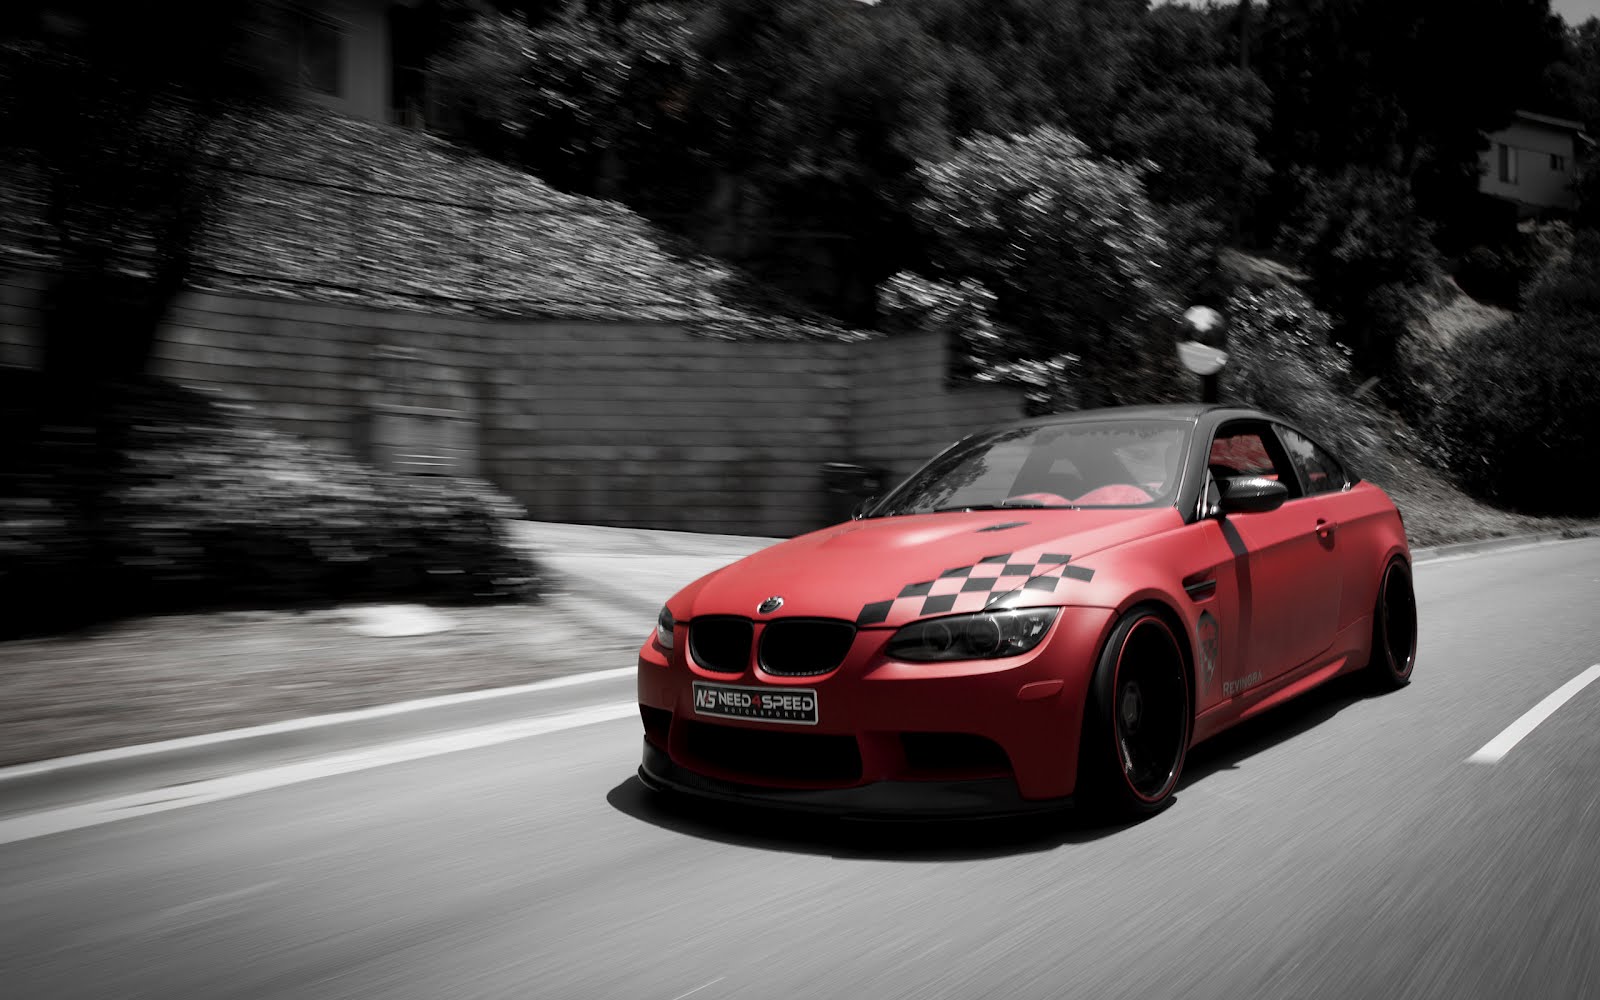 Cool 2012 G-Power BMW 1M Coupe Hd Wallpapers - cartestimony